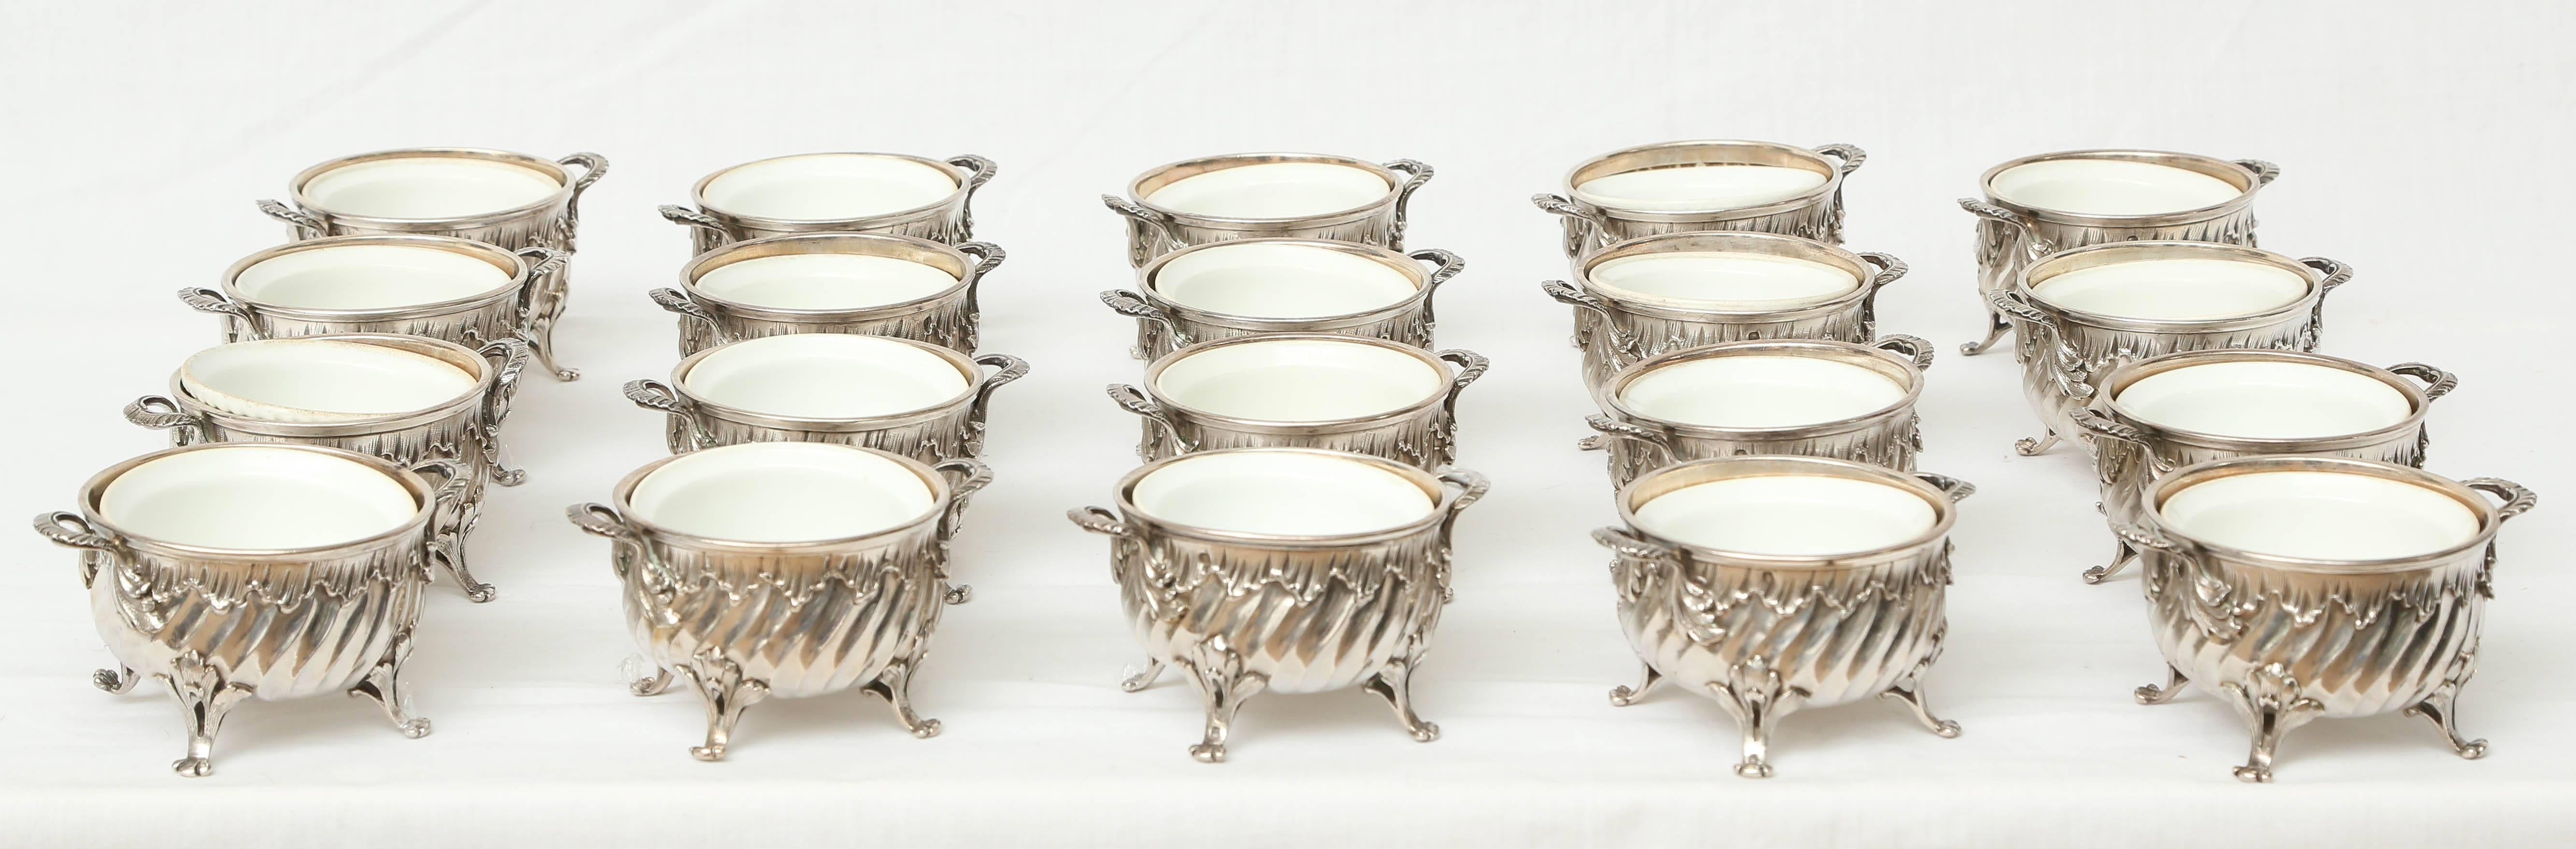 Set of 20 silver side dish bowls in silver with Limoge porcelain inserts. Typically used for Eggs Florentine. Gustave Keller Started his business in Paris in 1856.
Known for exceptional design and the highest level of craftsmanship he was awarded